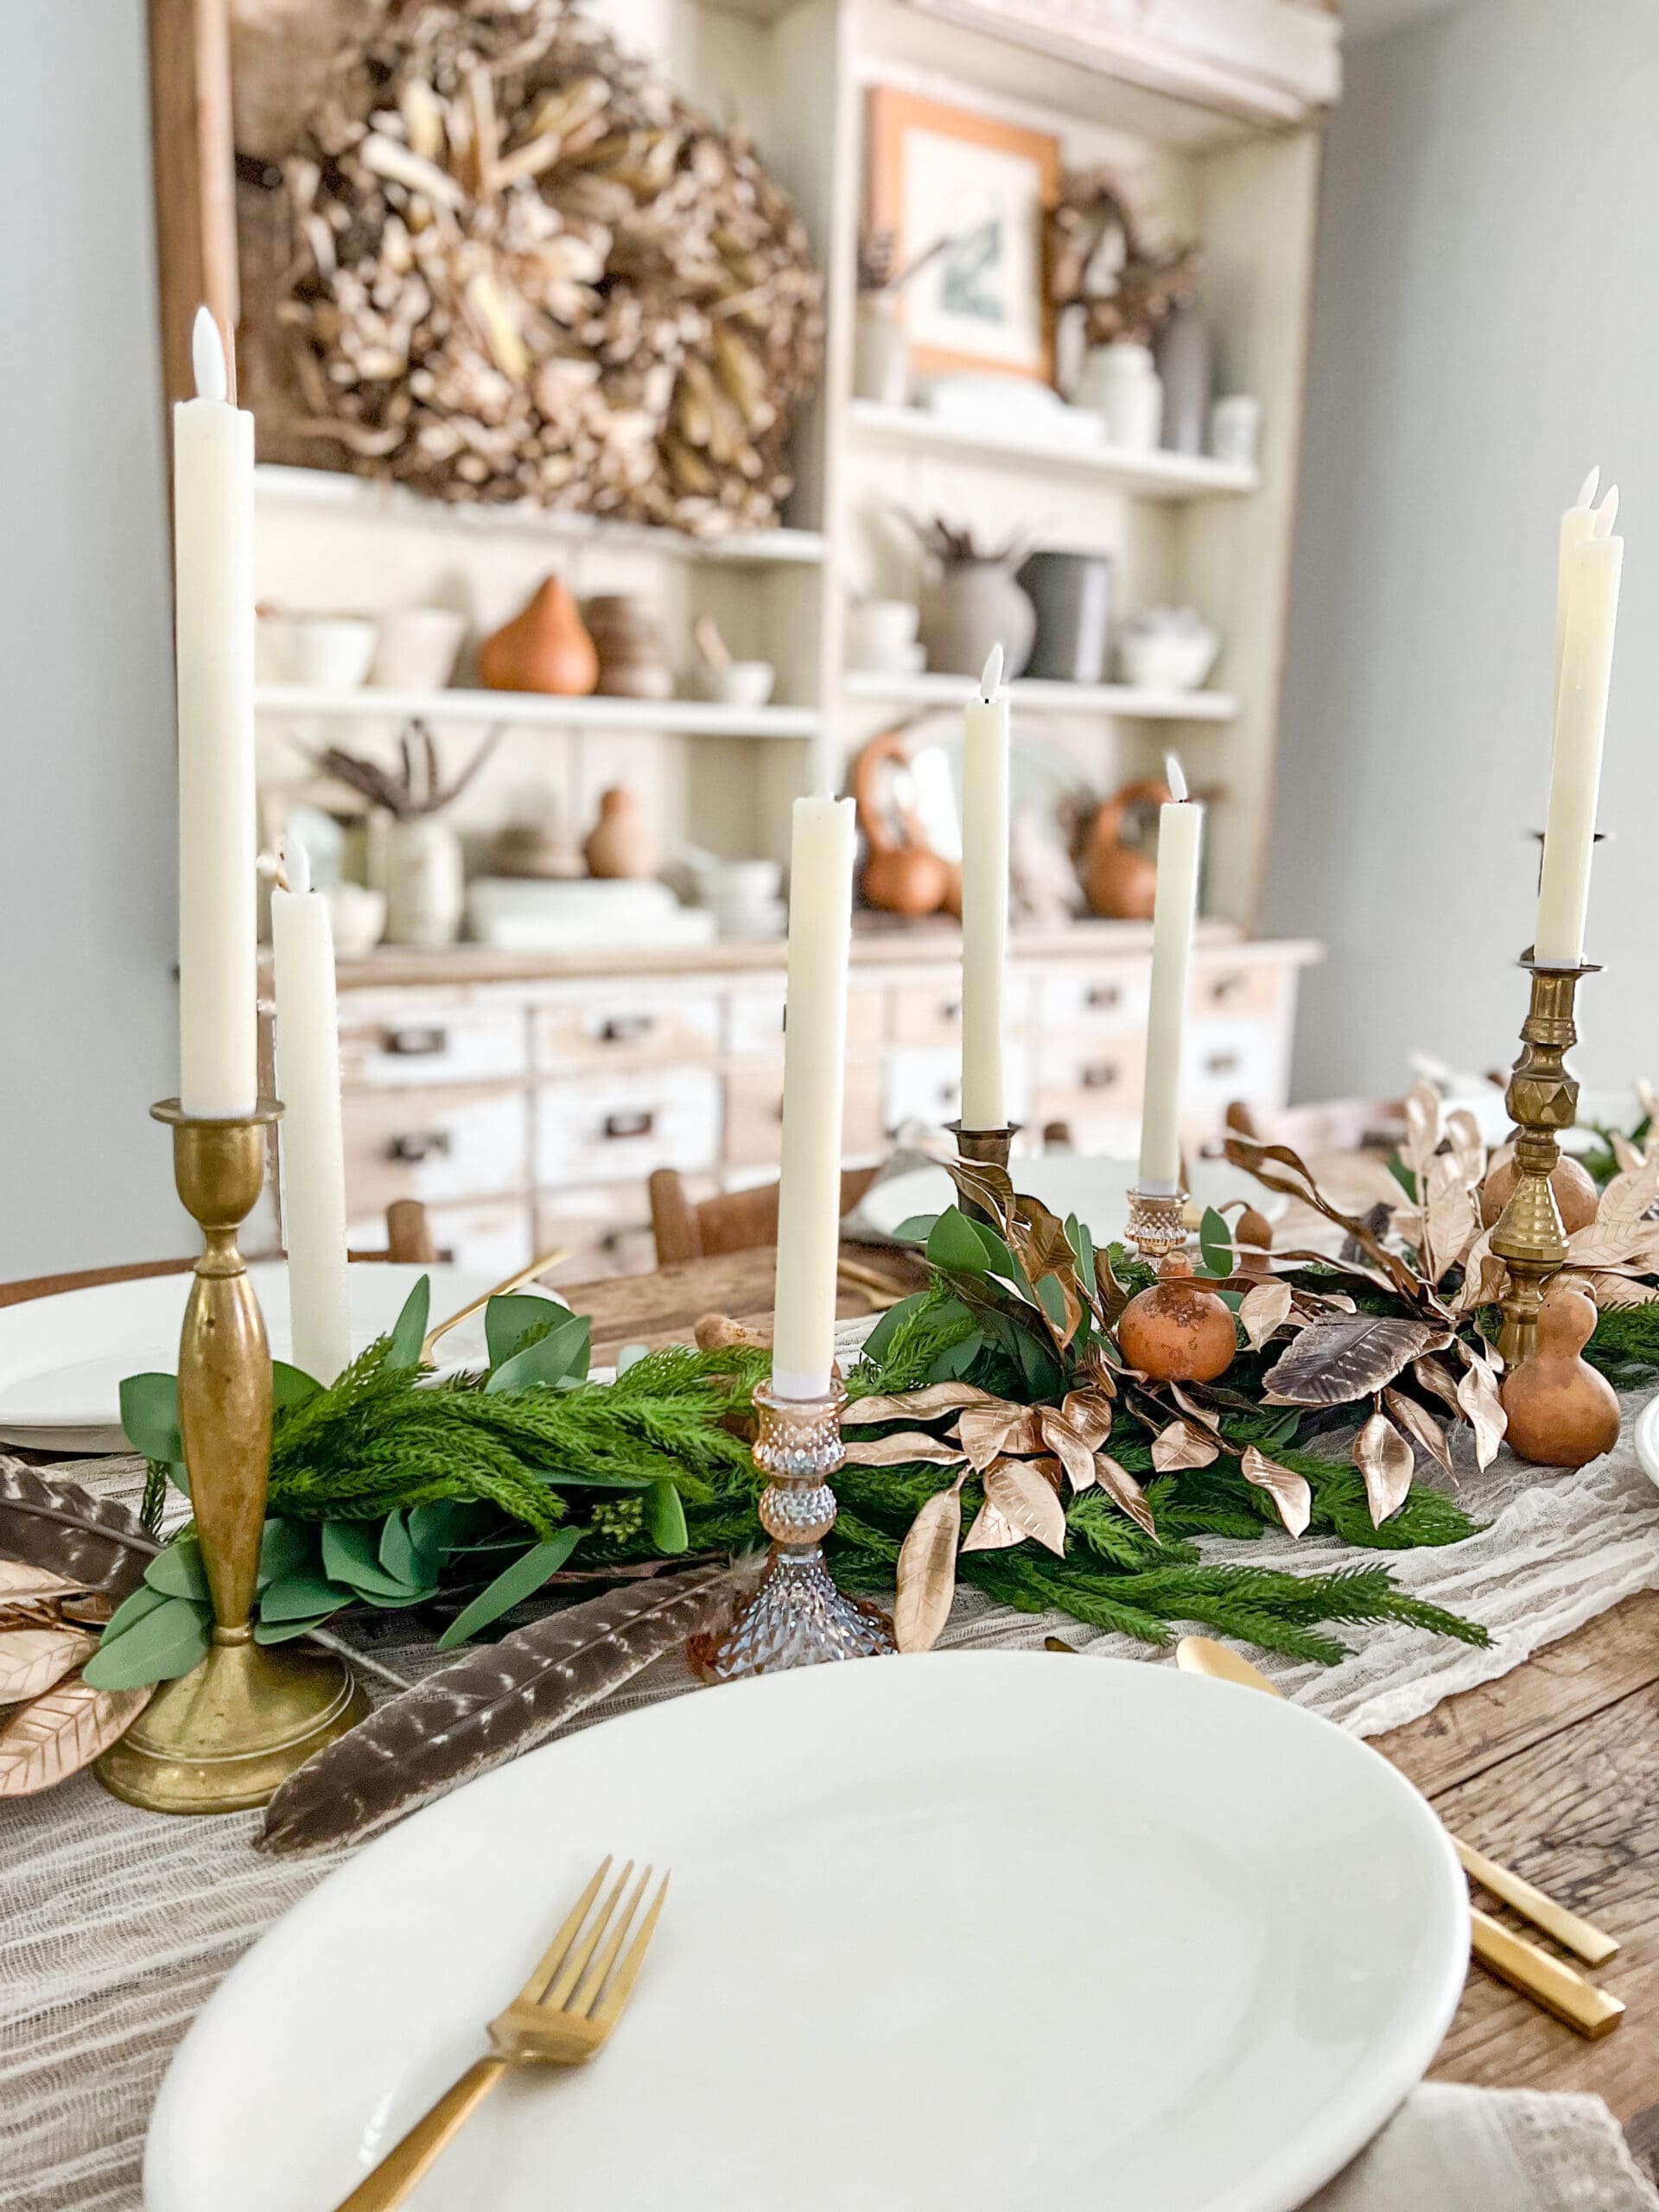 gold candlesticks and feathers tucked into green garland down the center of the table